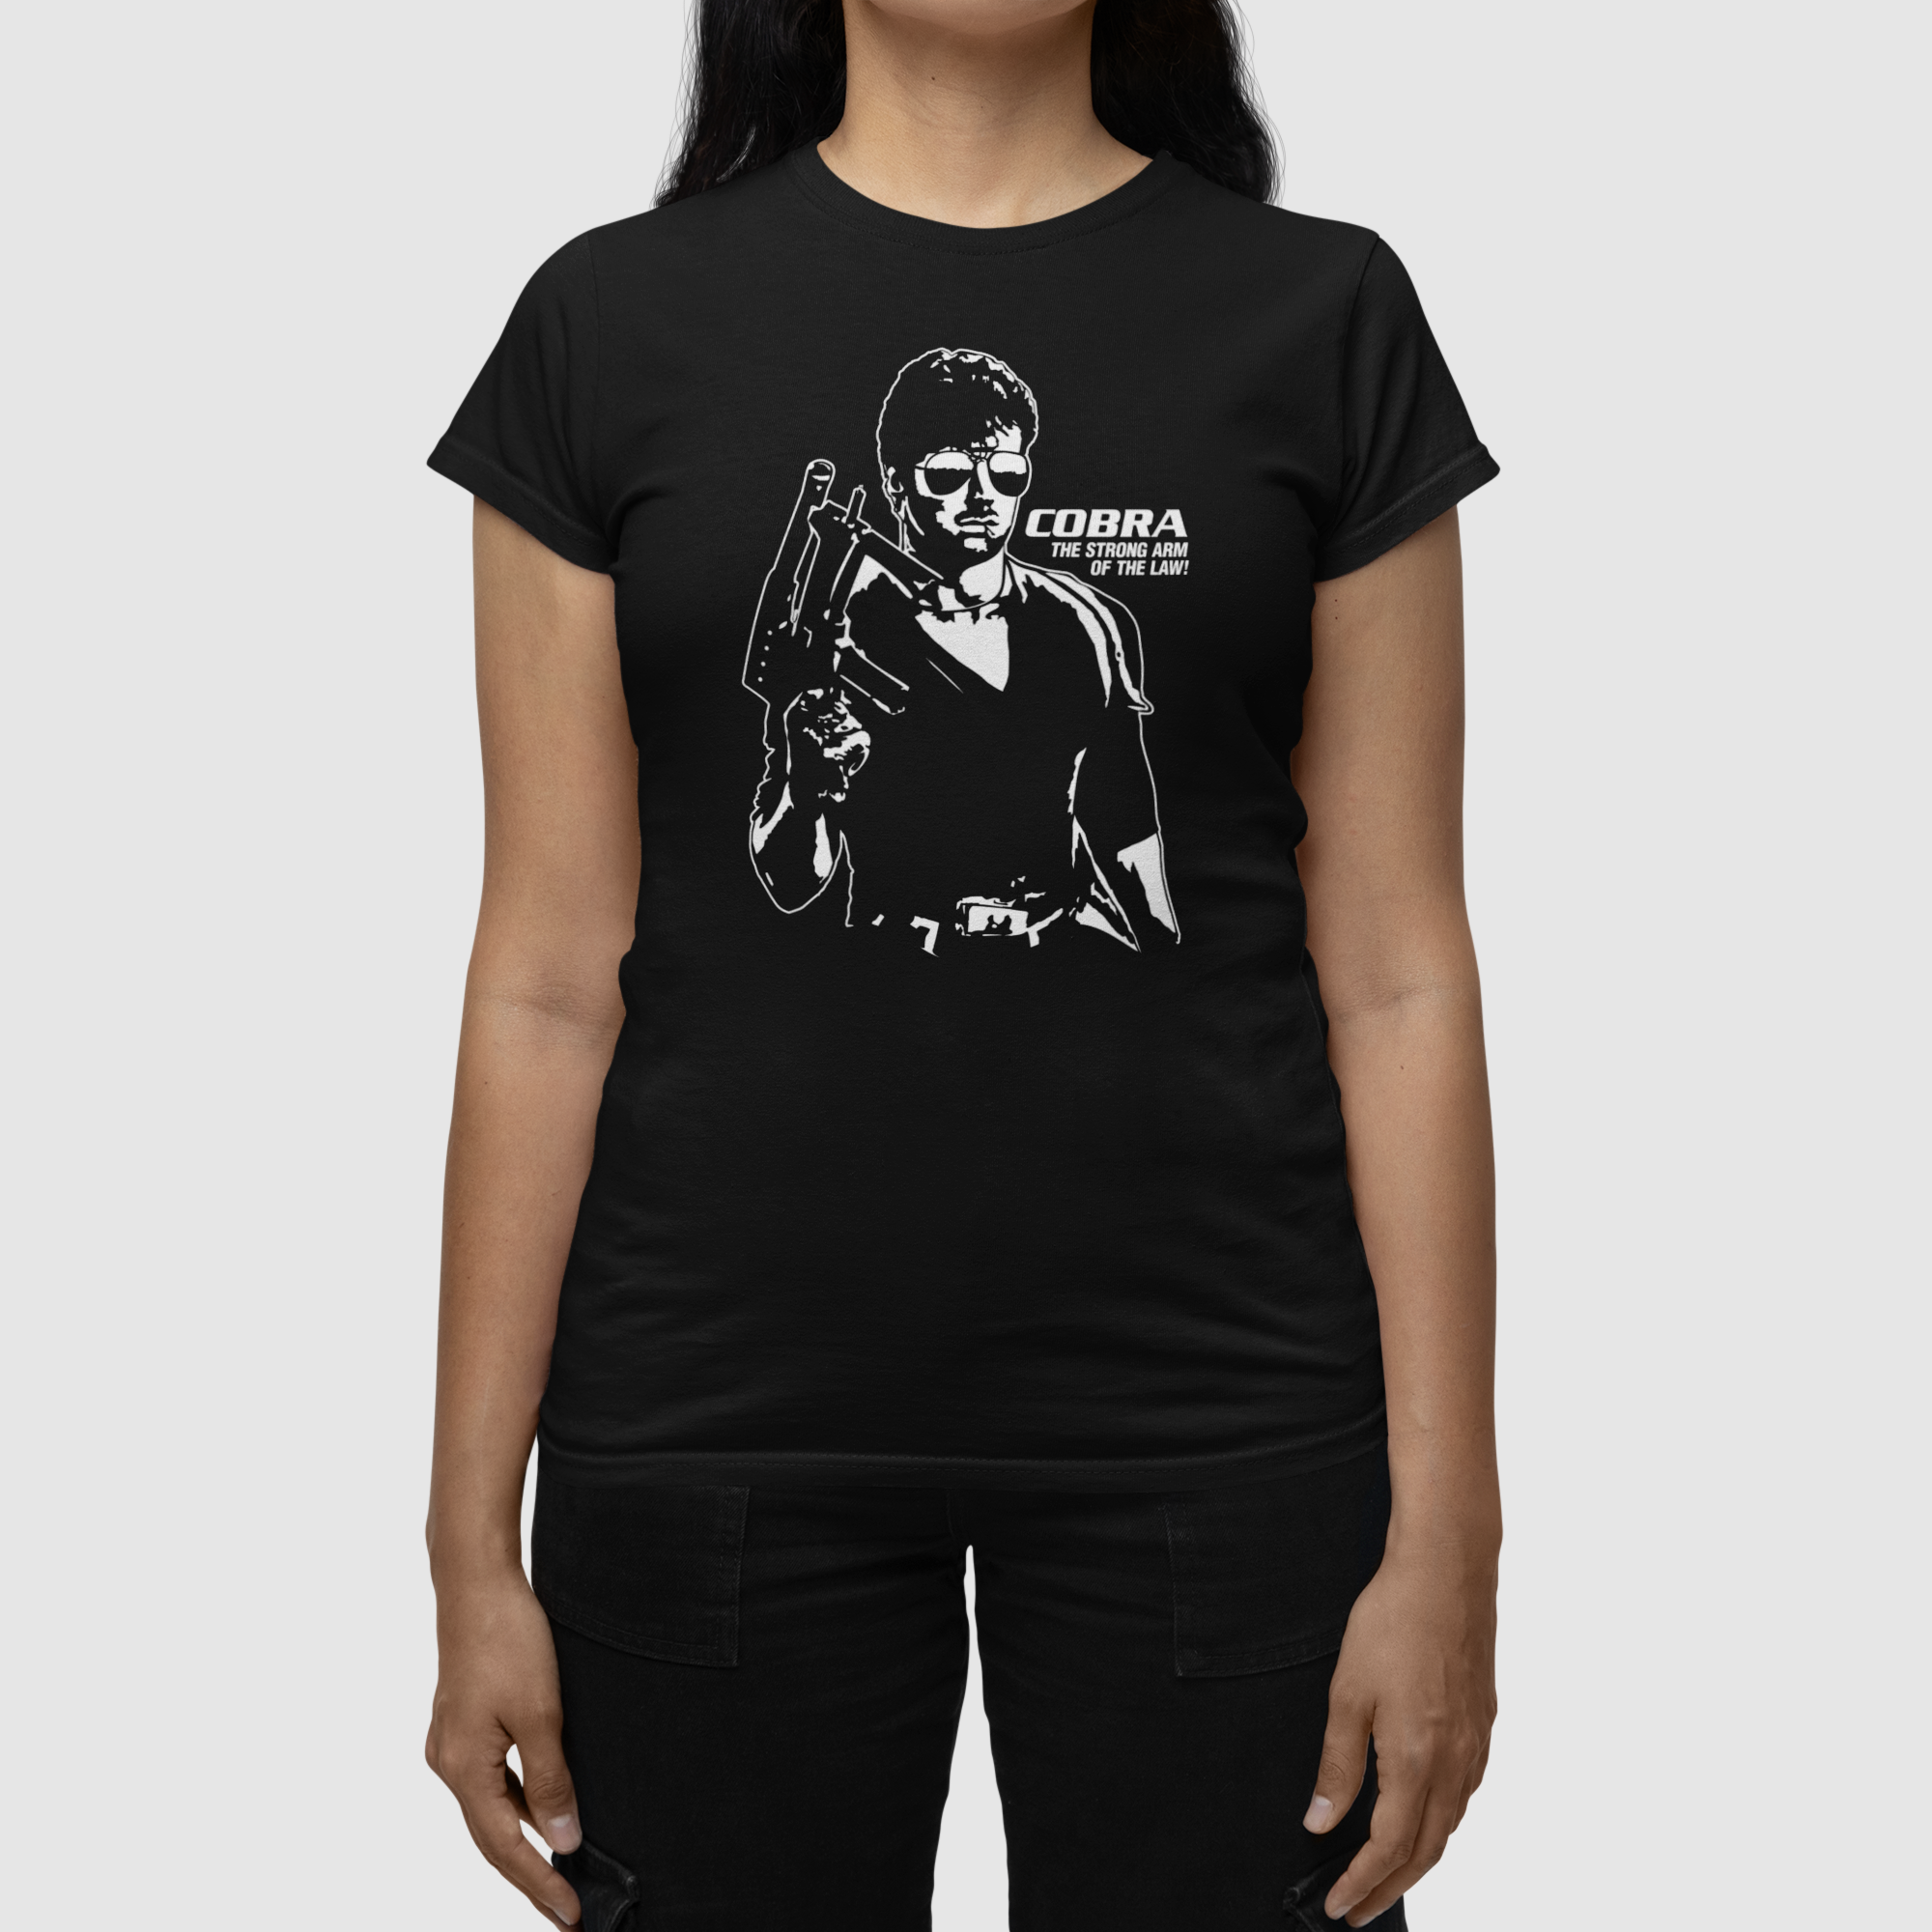 https://bigtime.de/media/4d/56/cb/1699618935/gildan-round-neck-tee-mockup-featuring-a-cropped-face-woman-in-a-studio-m35772%20%2816%29.png